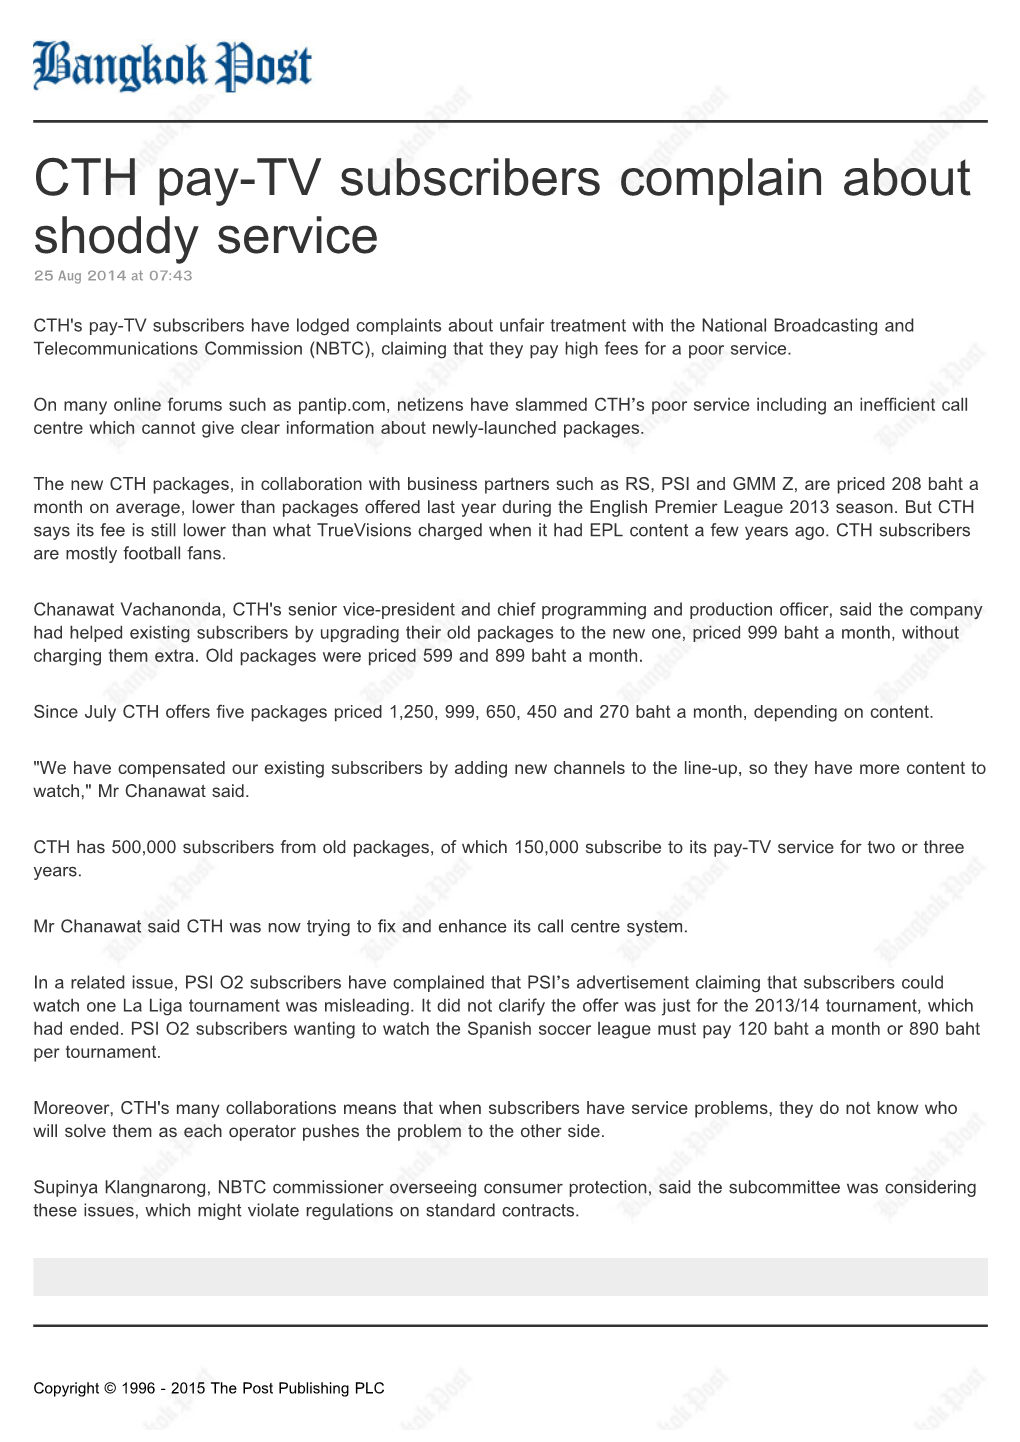 CTH Pay-TV Subscribers Complain About Shoddy Service 25 Aug 2014 at 07:43